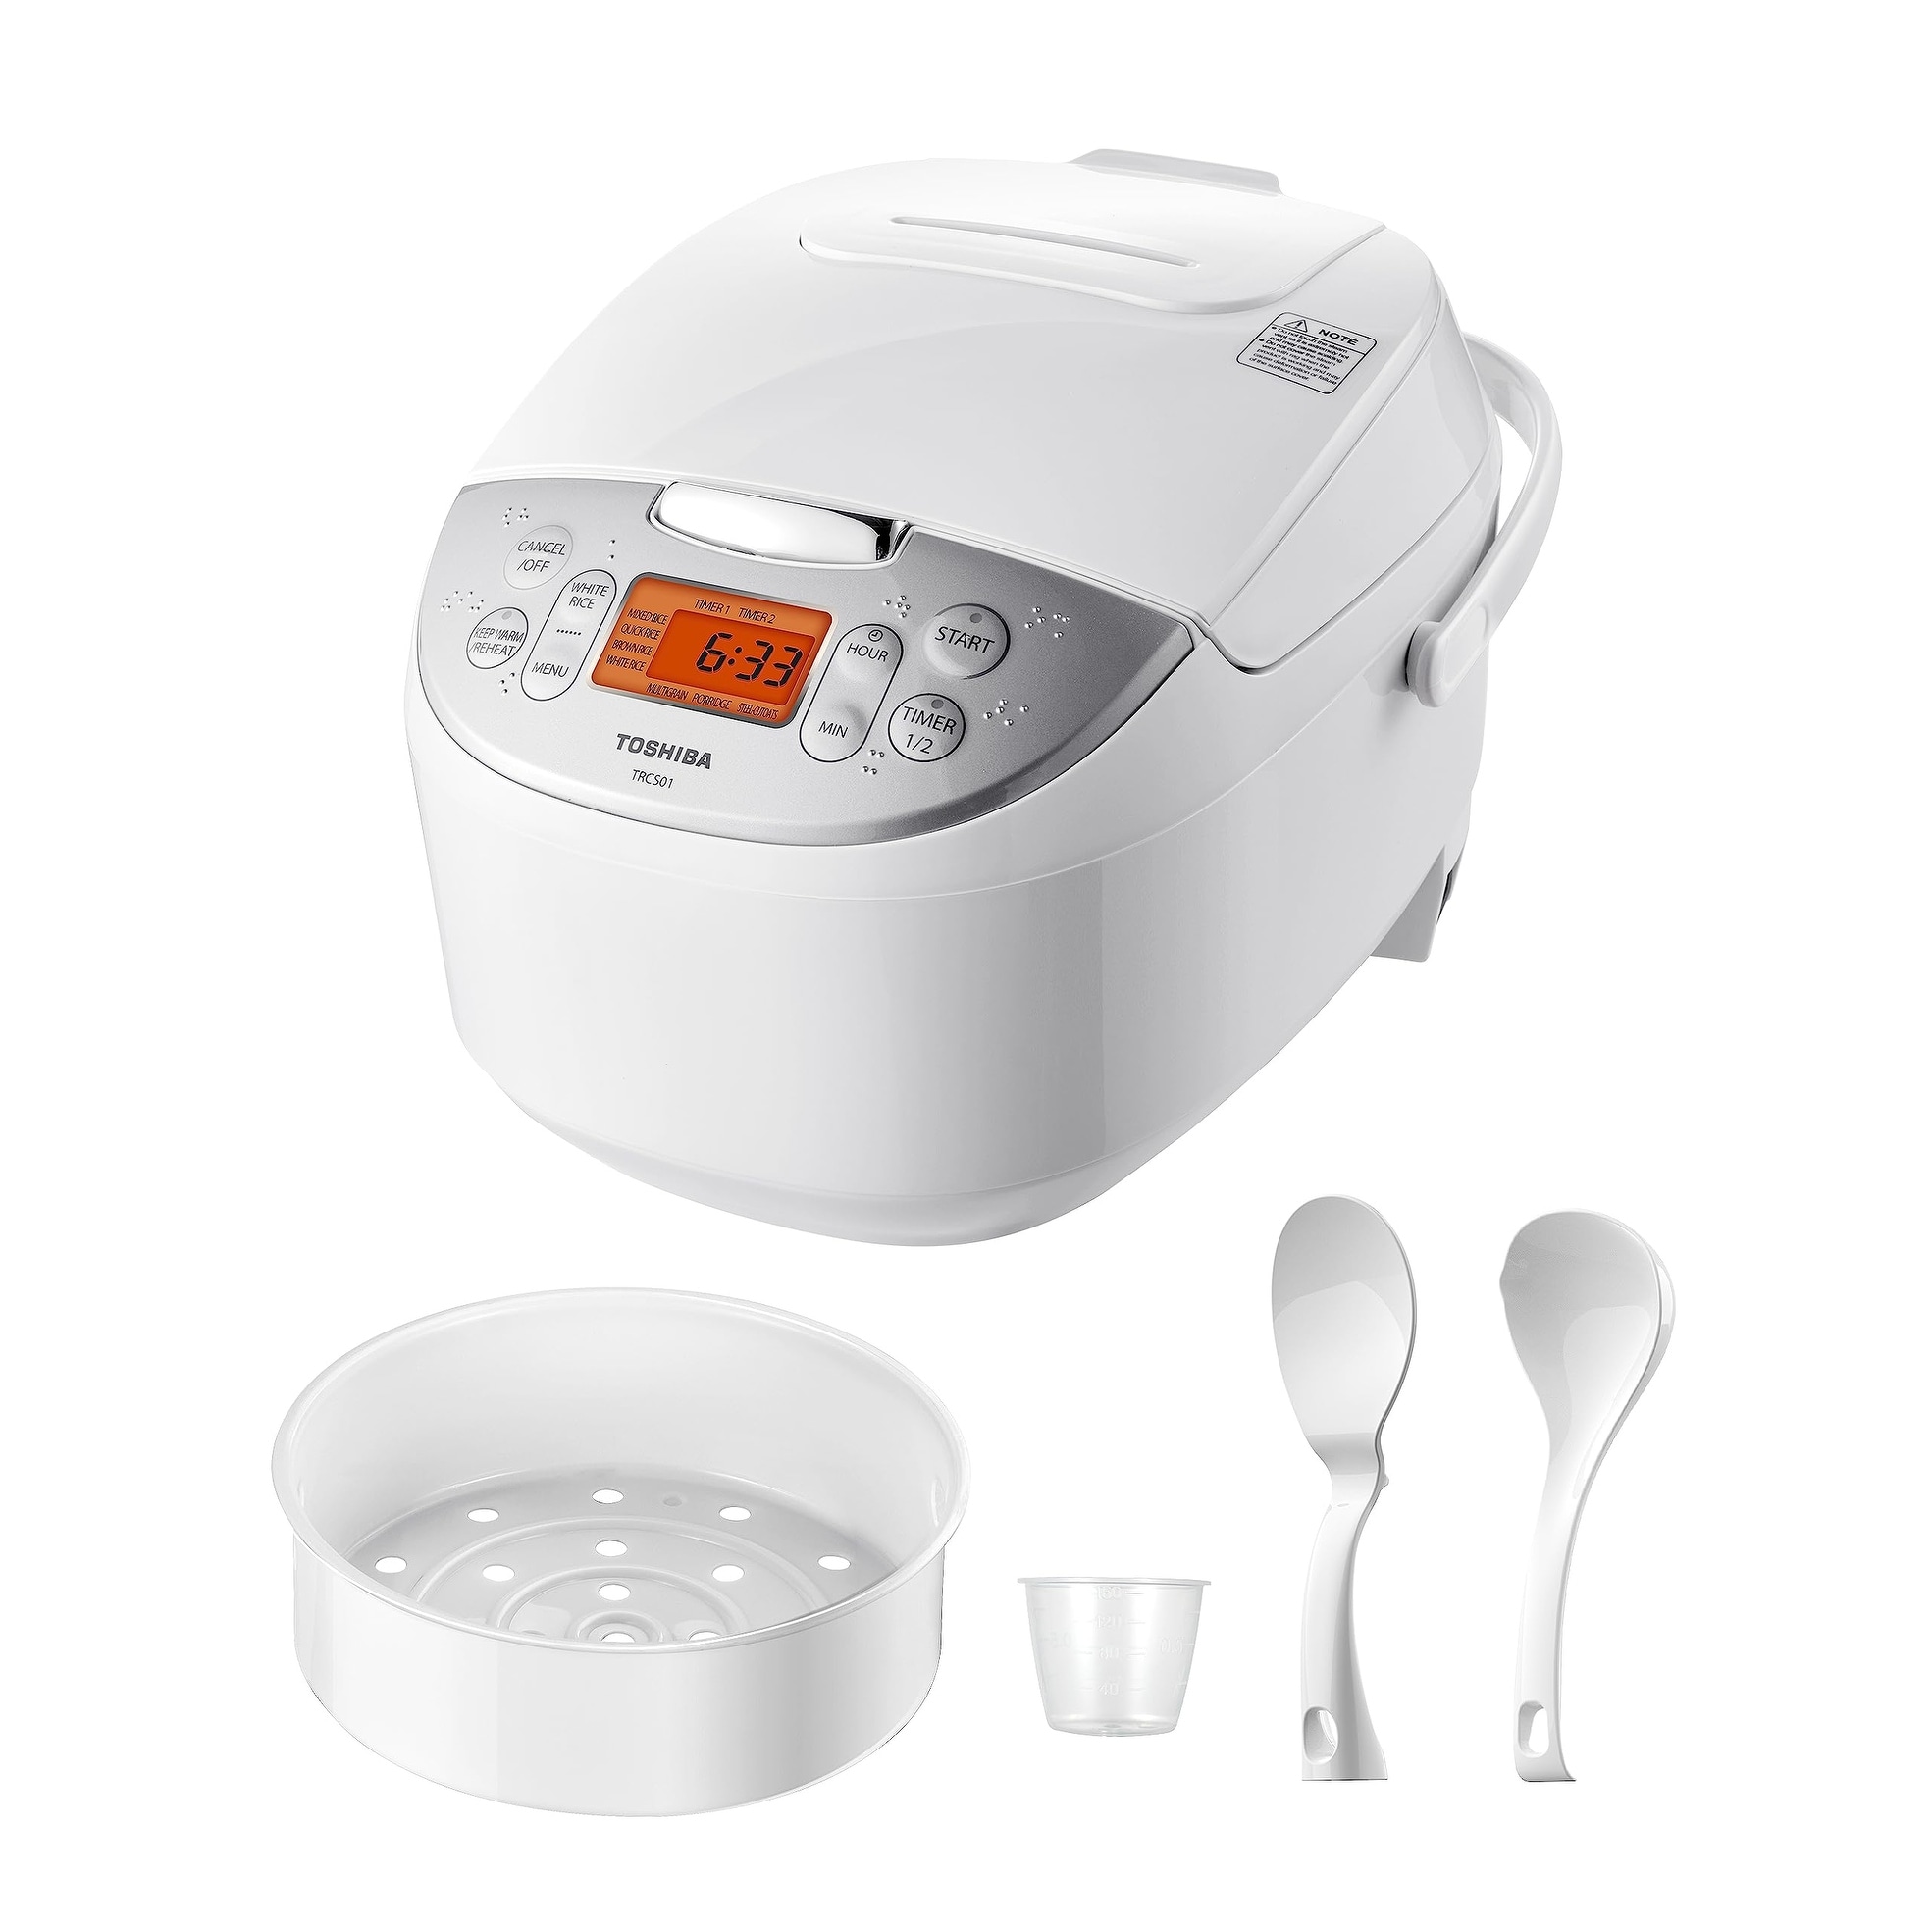 https://ak1.ostkcdn.com/images/products/is/images/direct/6d2759d2b0b55bc8b2fbca1545d29e7850e2a447/6-Cup-Uncooked-Rice-Cooker%2C-with-Fuzzy-Logic-Technology%2C-7-Cooking%2C-Digital-Display%2C-2-Delay-Timers-%26-Auto-Keep-Warm%2C-Inner-Pot.jpg